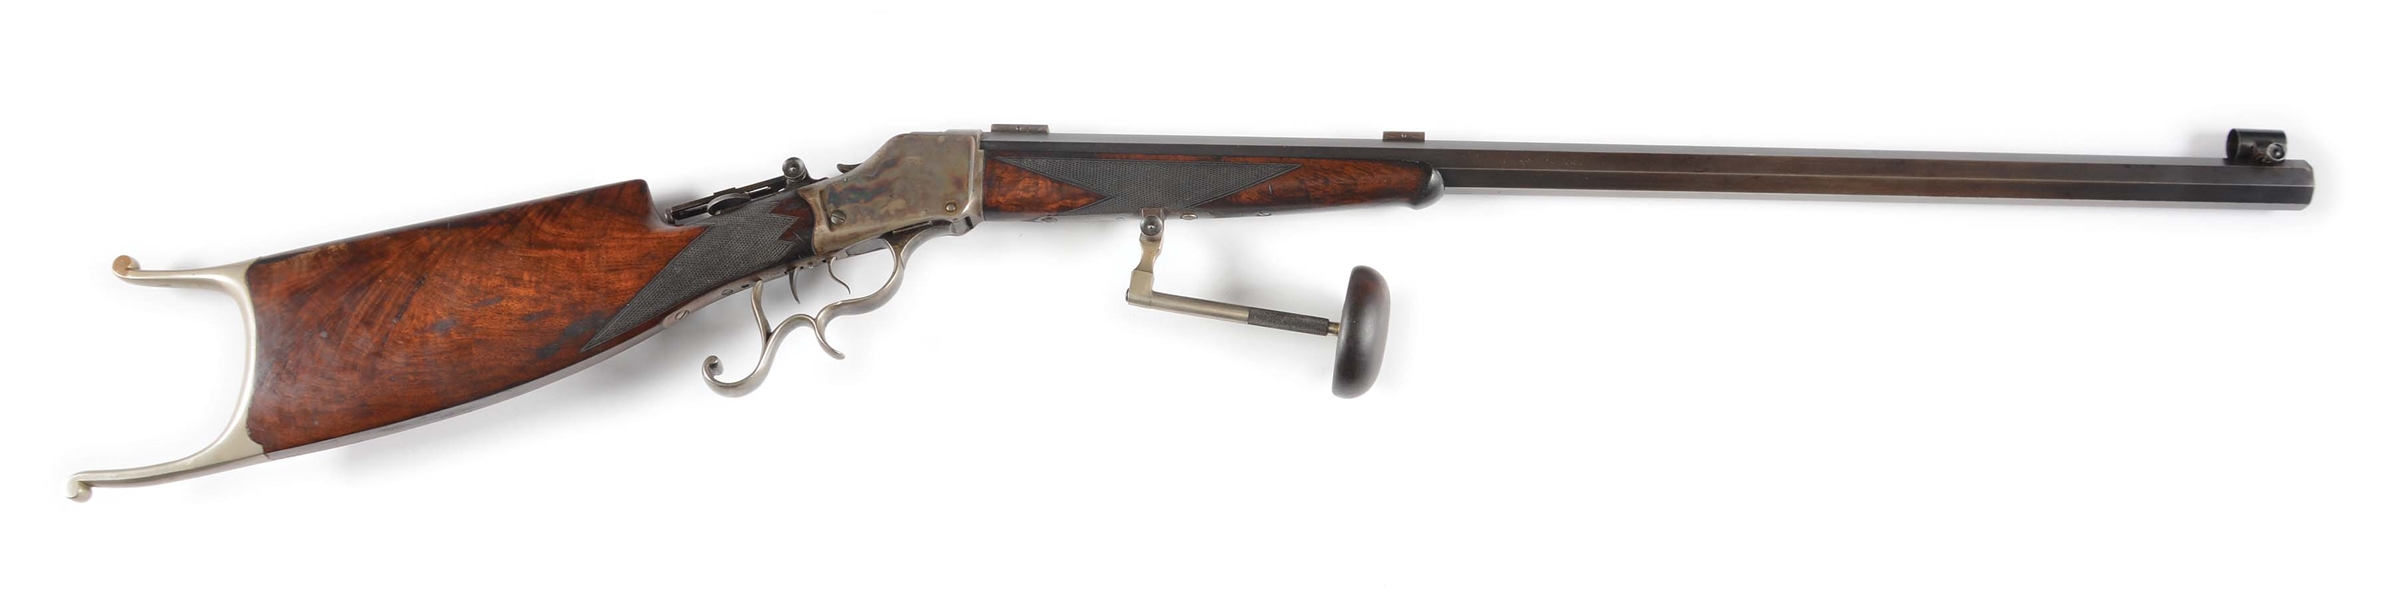 (A) WINCHESTER HI-WALL OFF HAND RIFLE WITH CASE HARDENED ACTION.